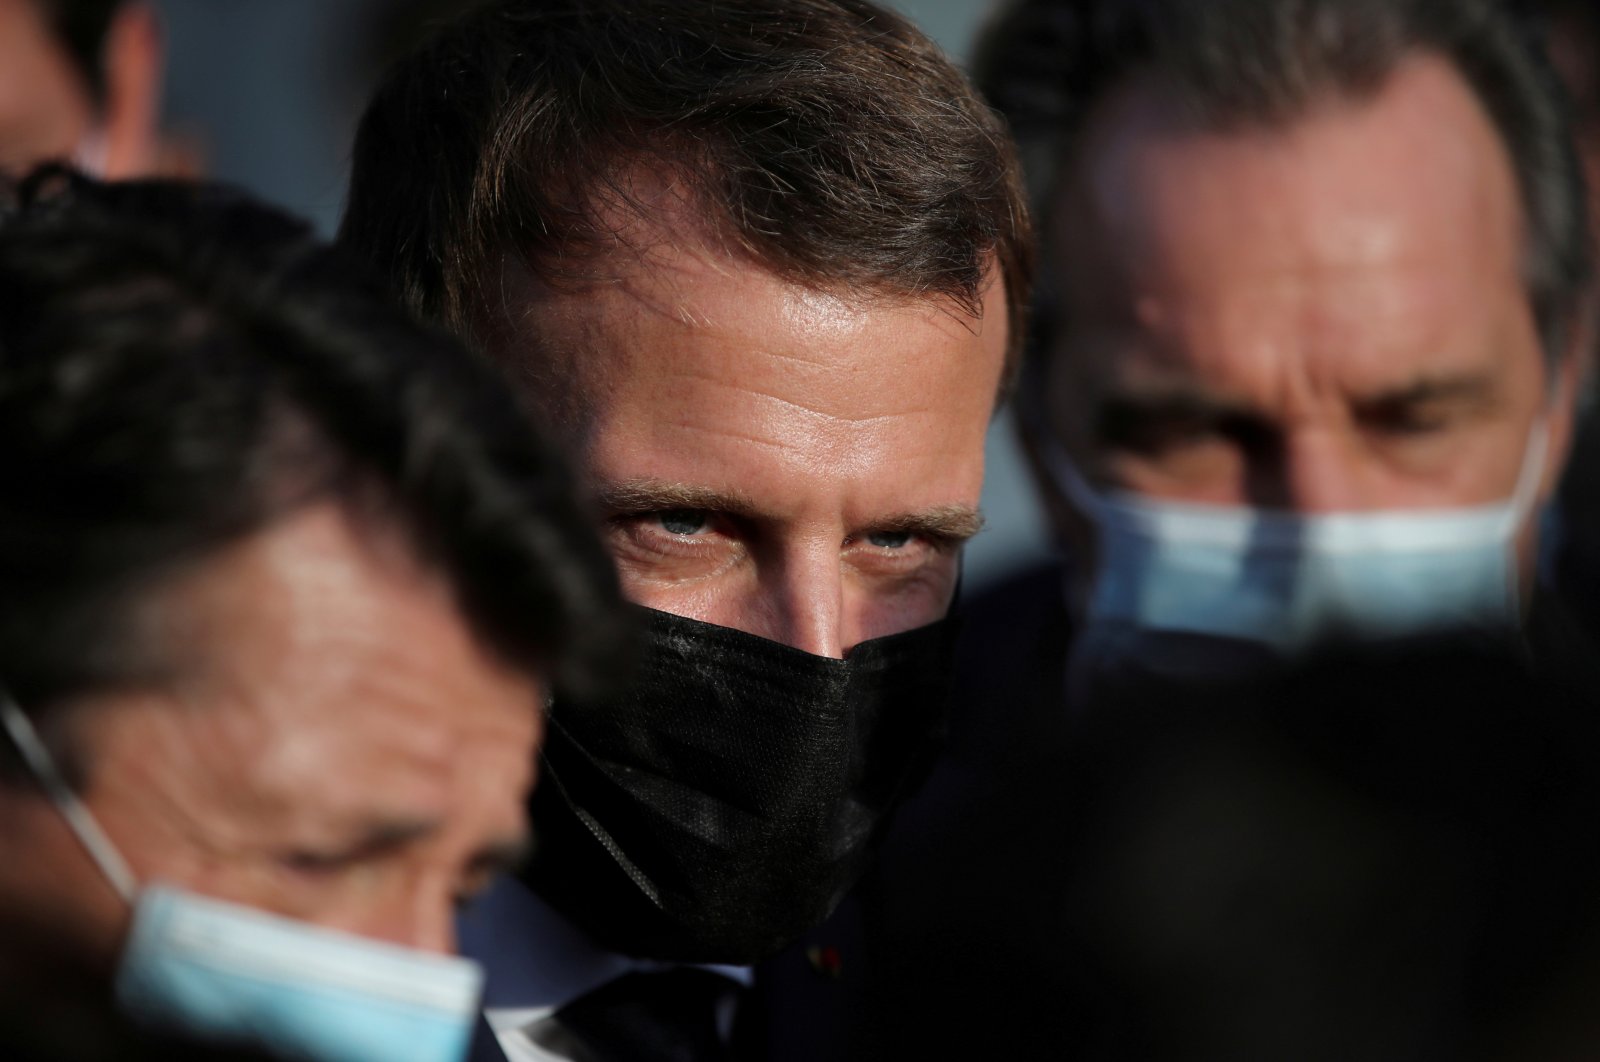 French President Emmanuel Macron meets residents and officials as he arrives in Breil-sur-Roya, France, Oct. 7, 2020. (Reuters Photo)